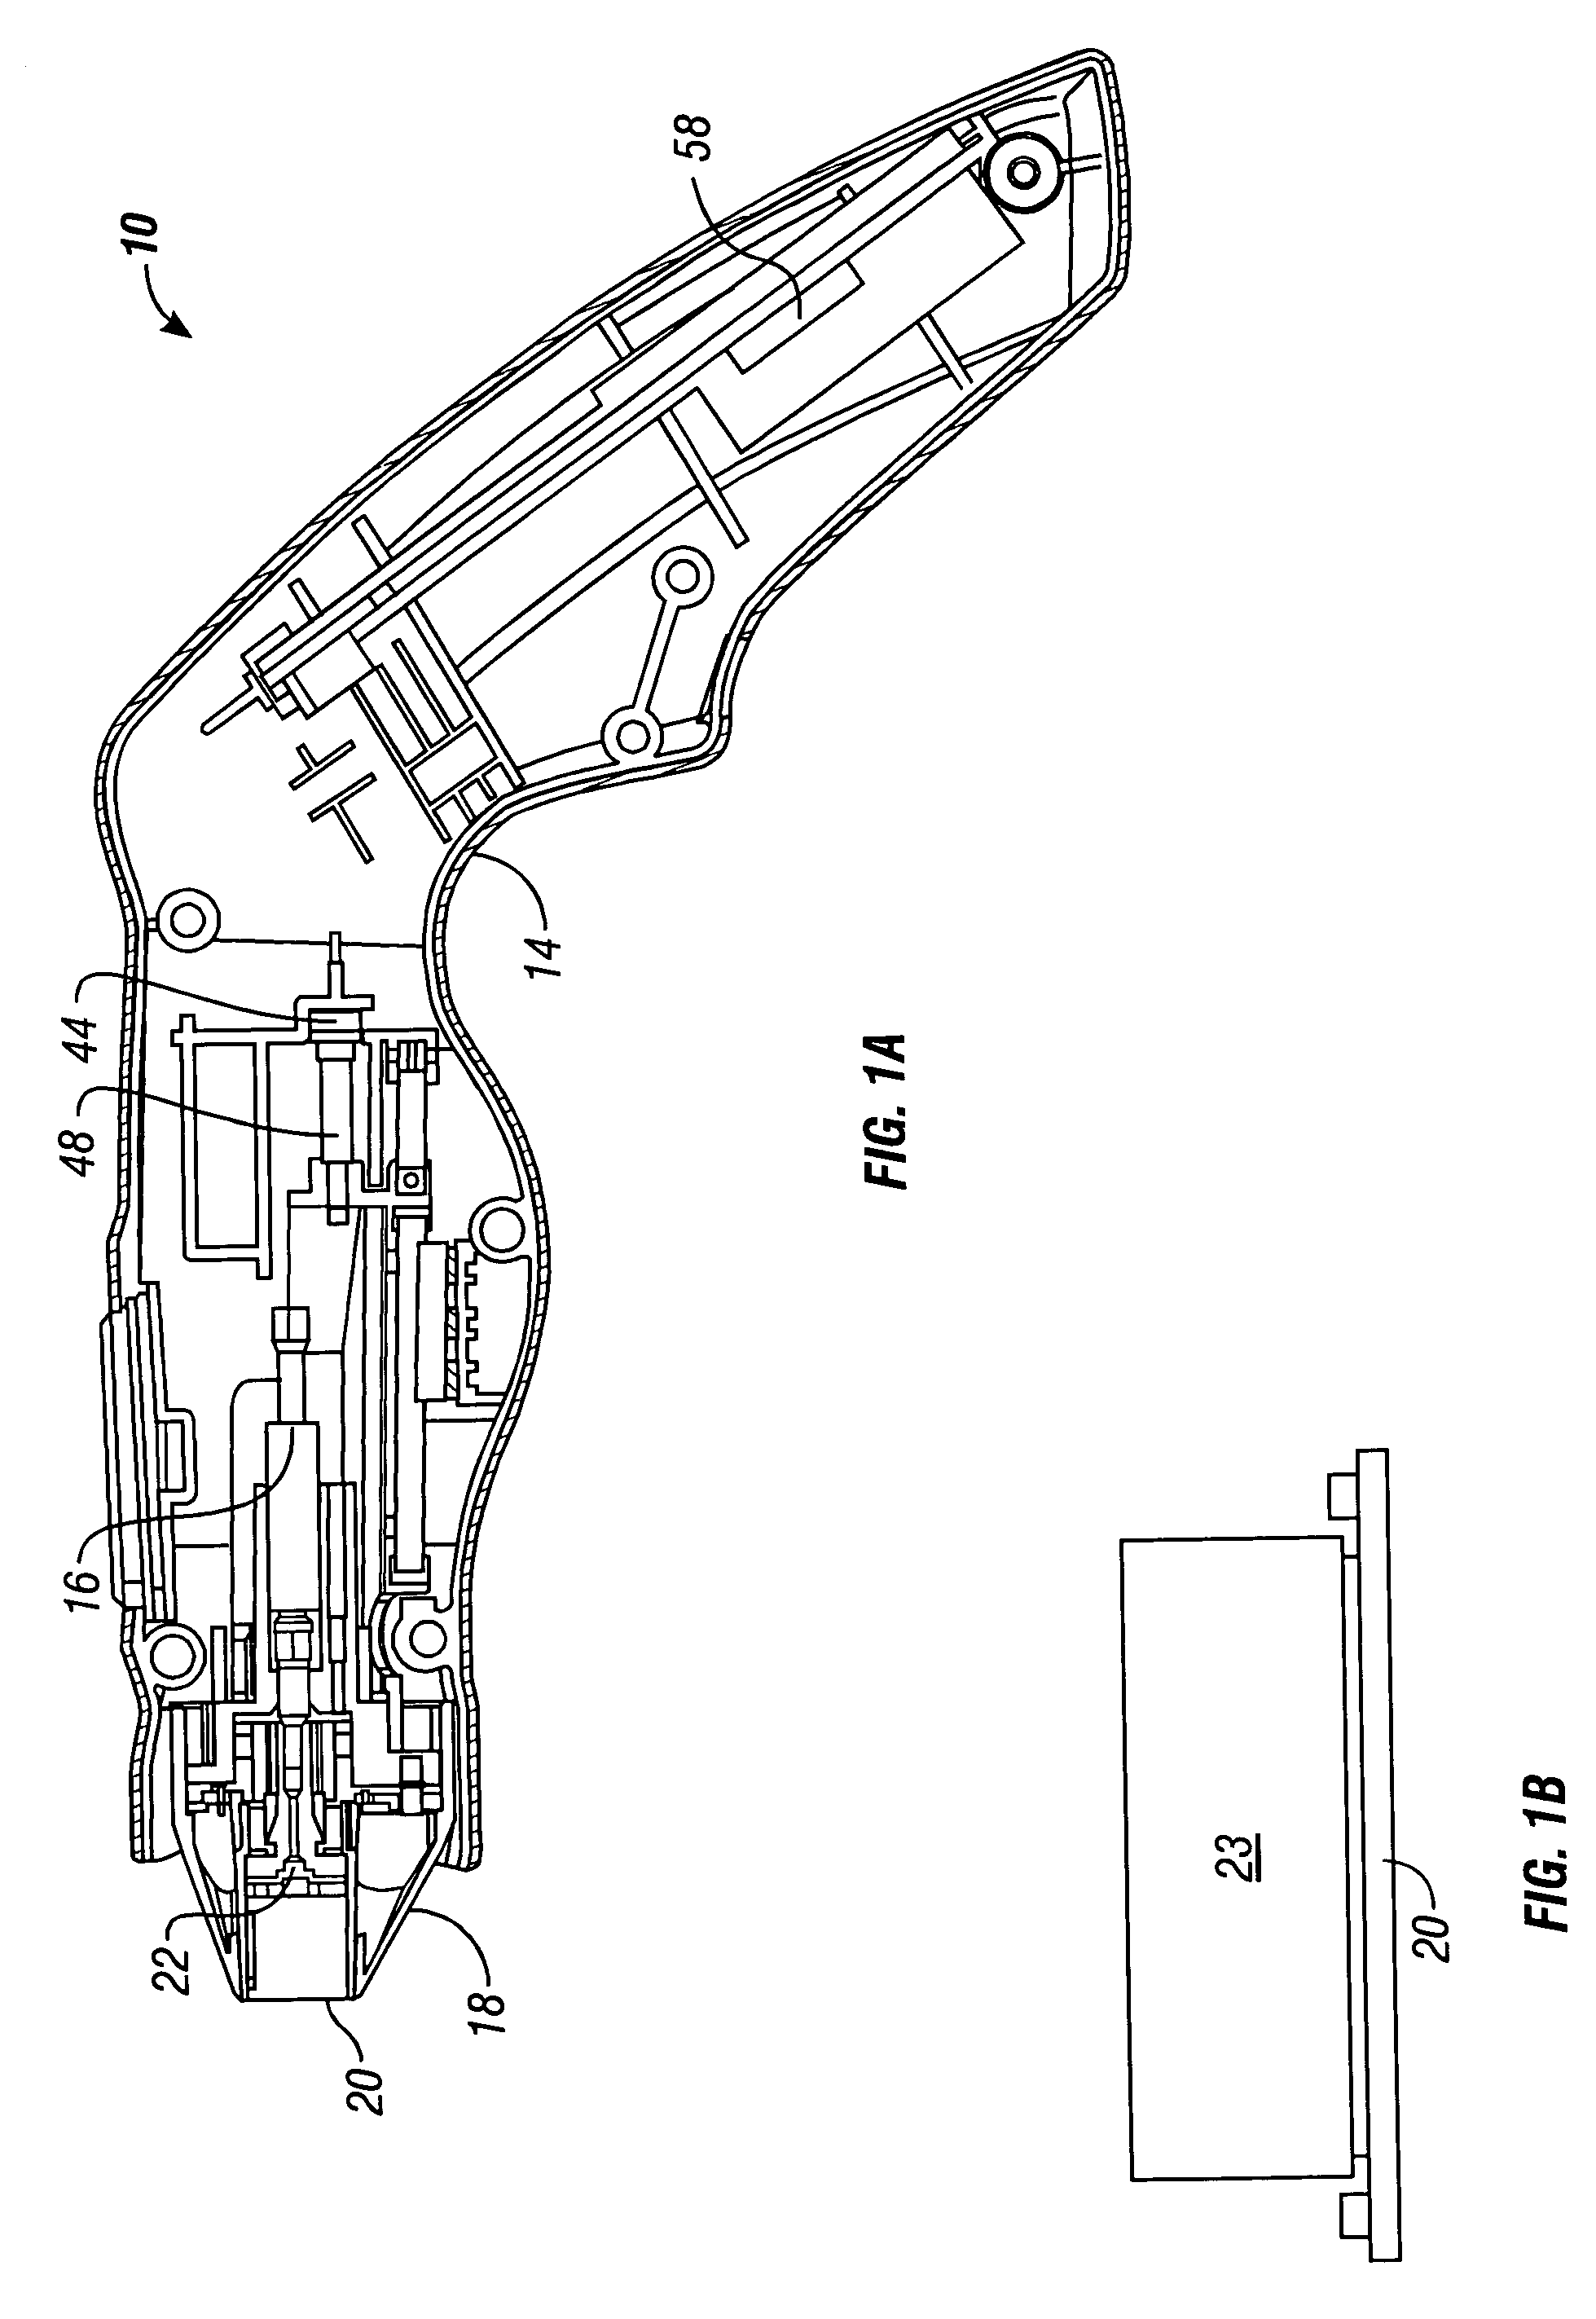 Method and kit for treatment of tissue